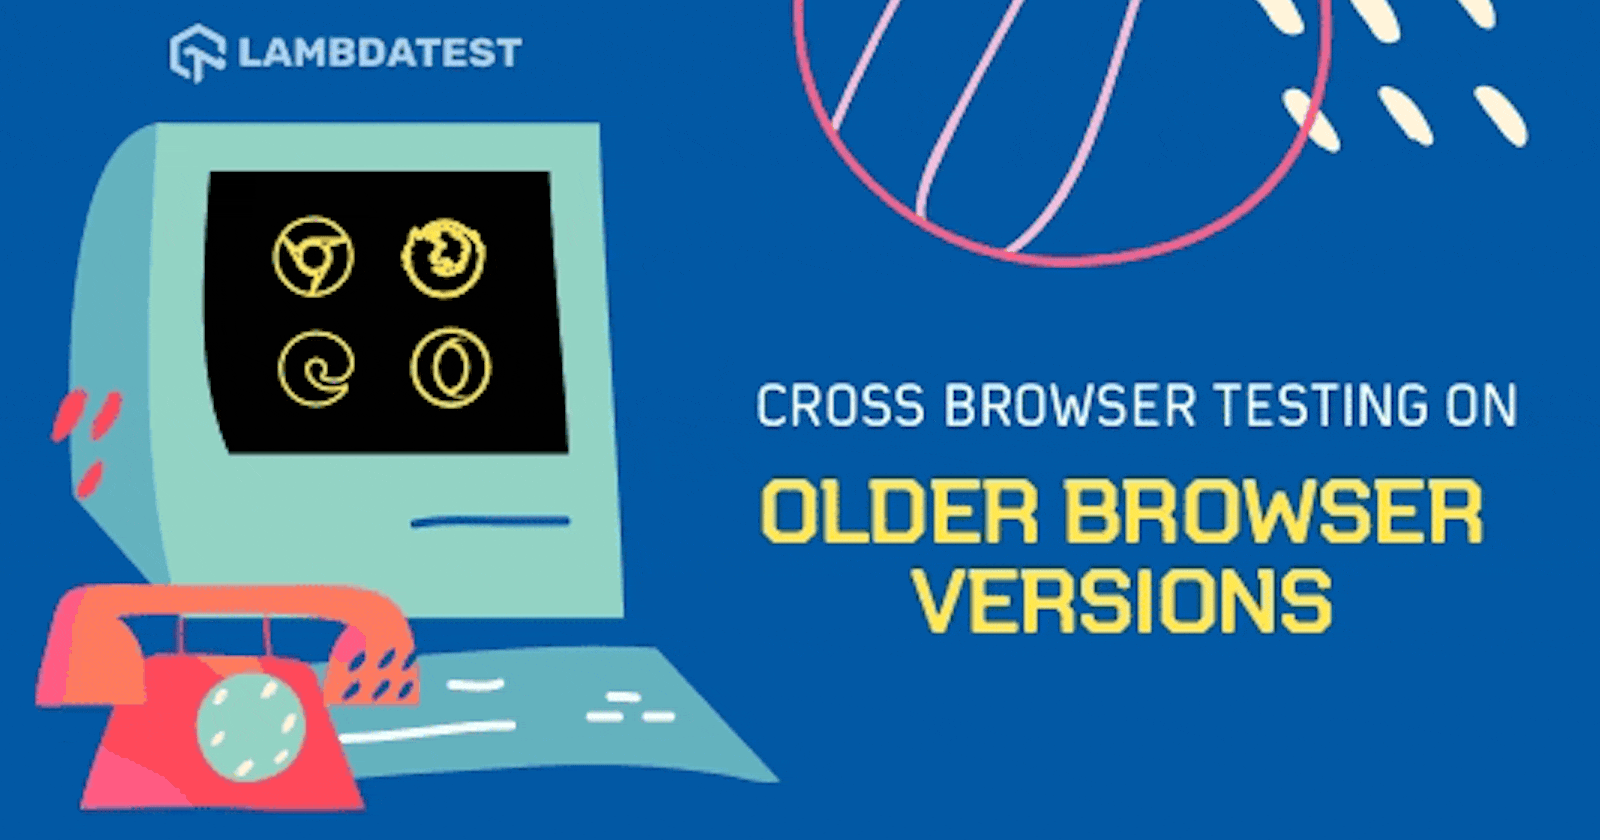 Guide To Cross Browser Testing On Older Browser Versions